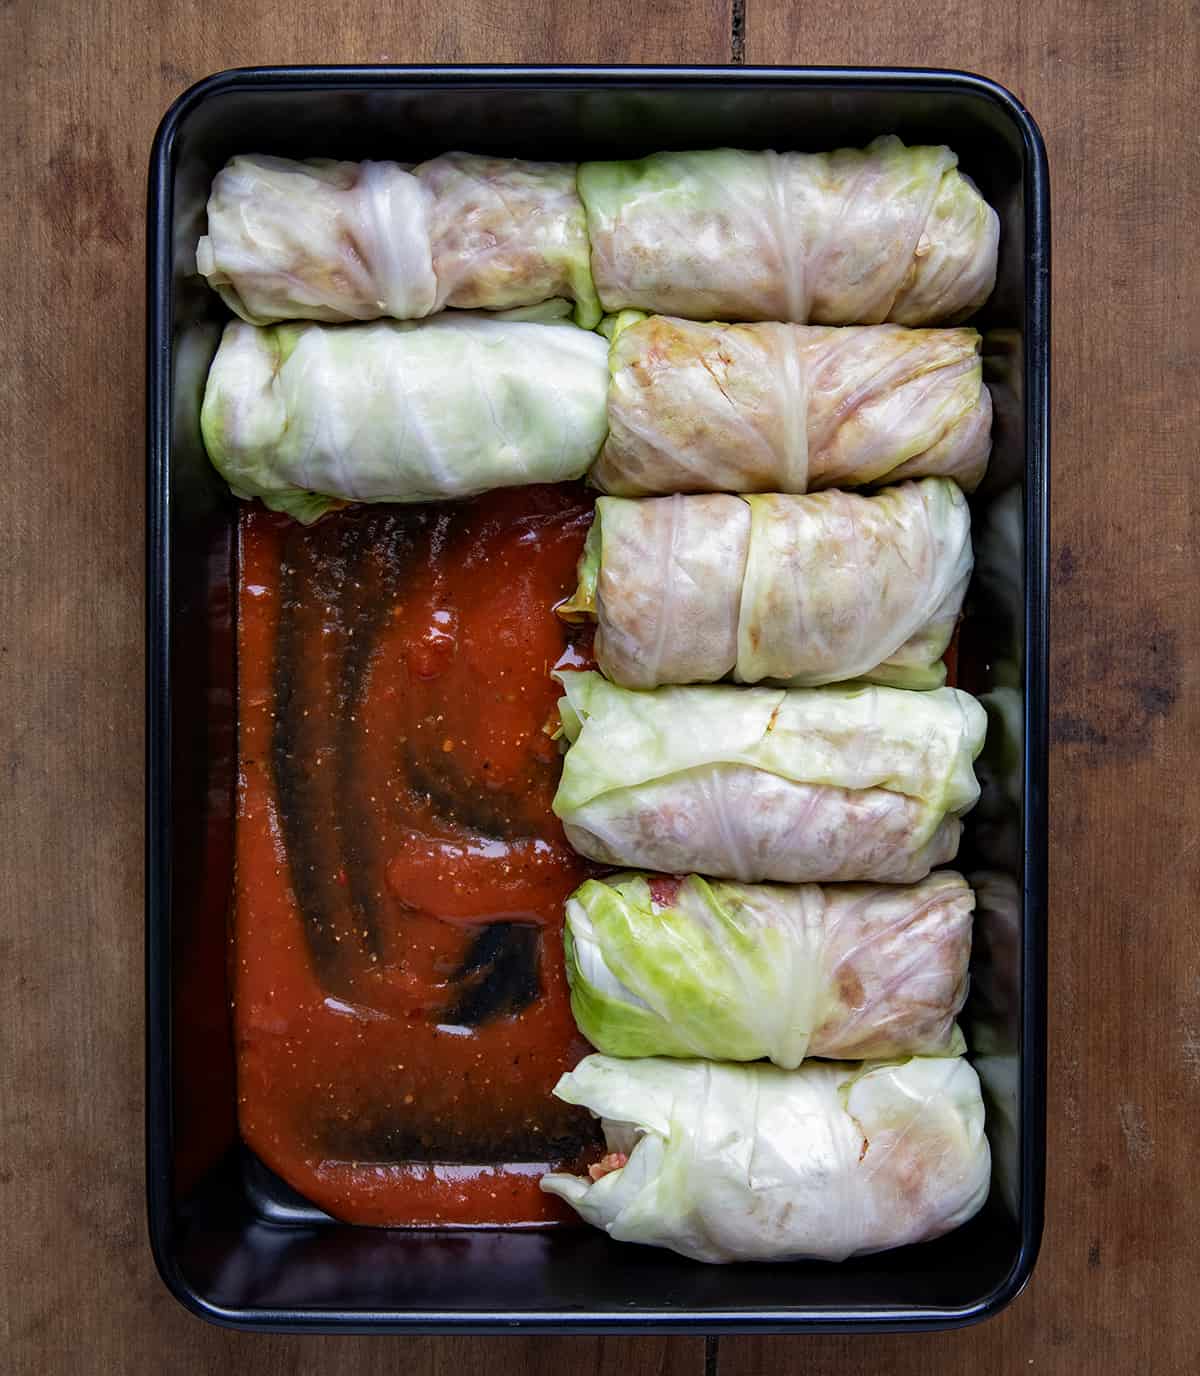 Placing Cabbage Rolls in a pan with sauce.